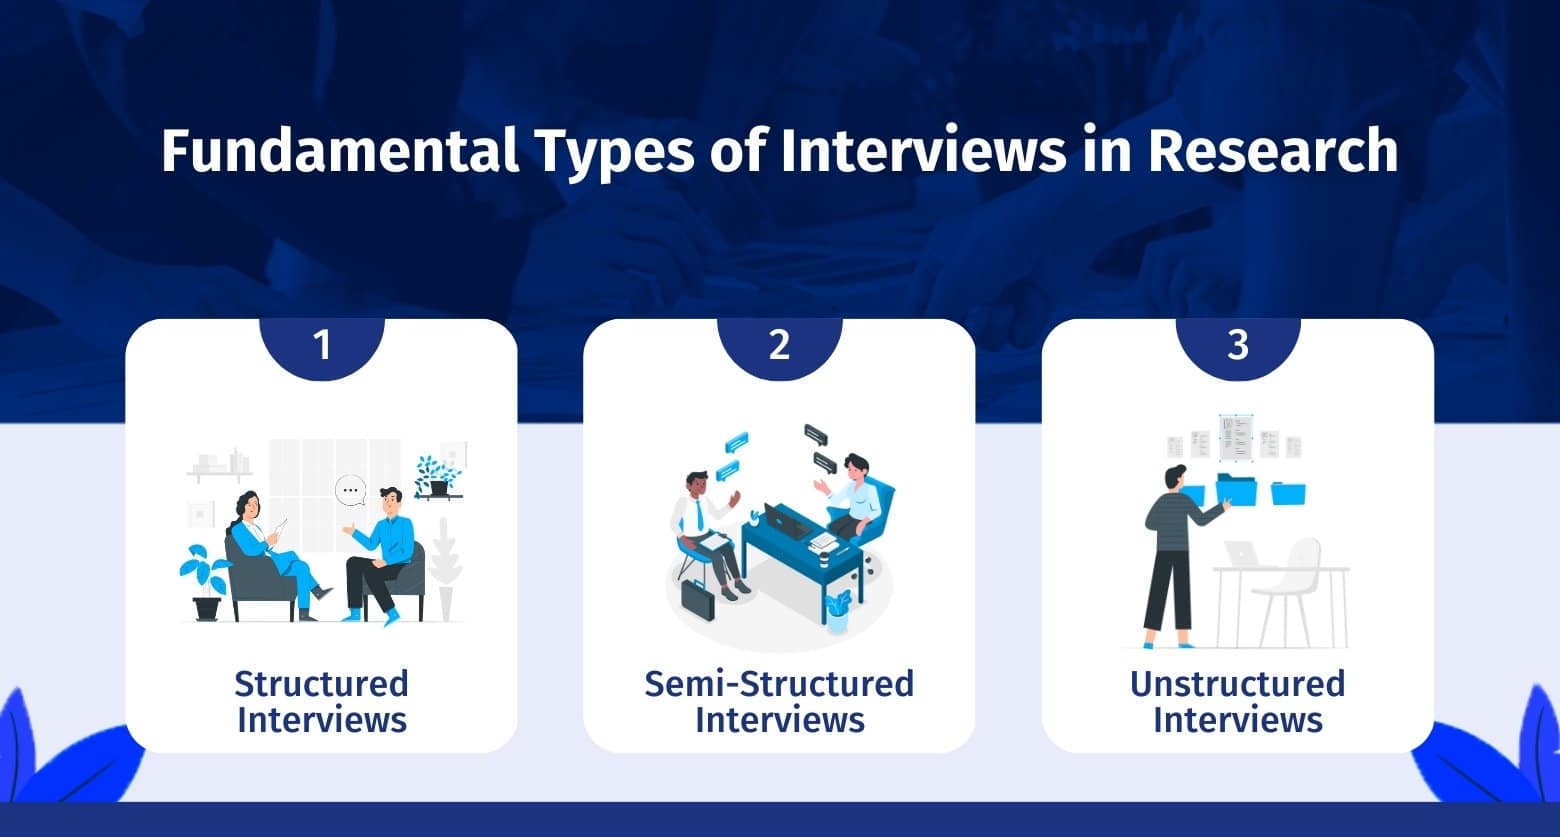 interview in research meaning